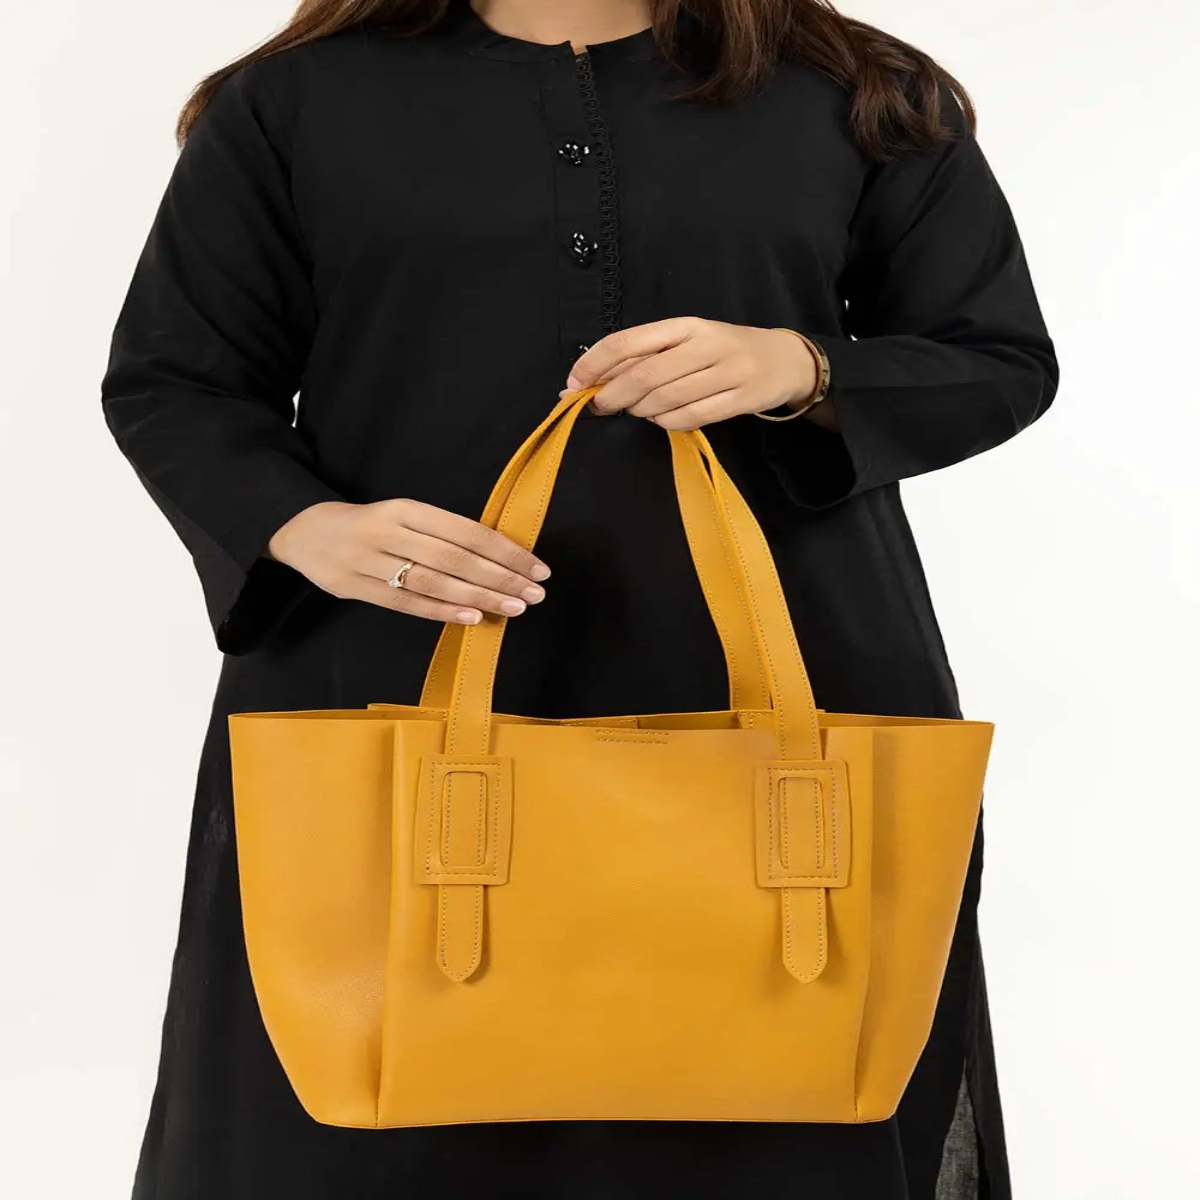 Askani Group Mustard-Yellow Tote Bag Organizer is the Perfect Blend of style & Functionality for the Modern Woman on the GO